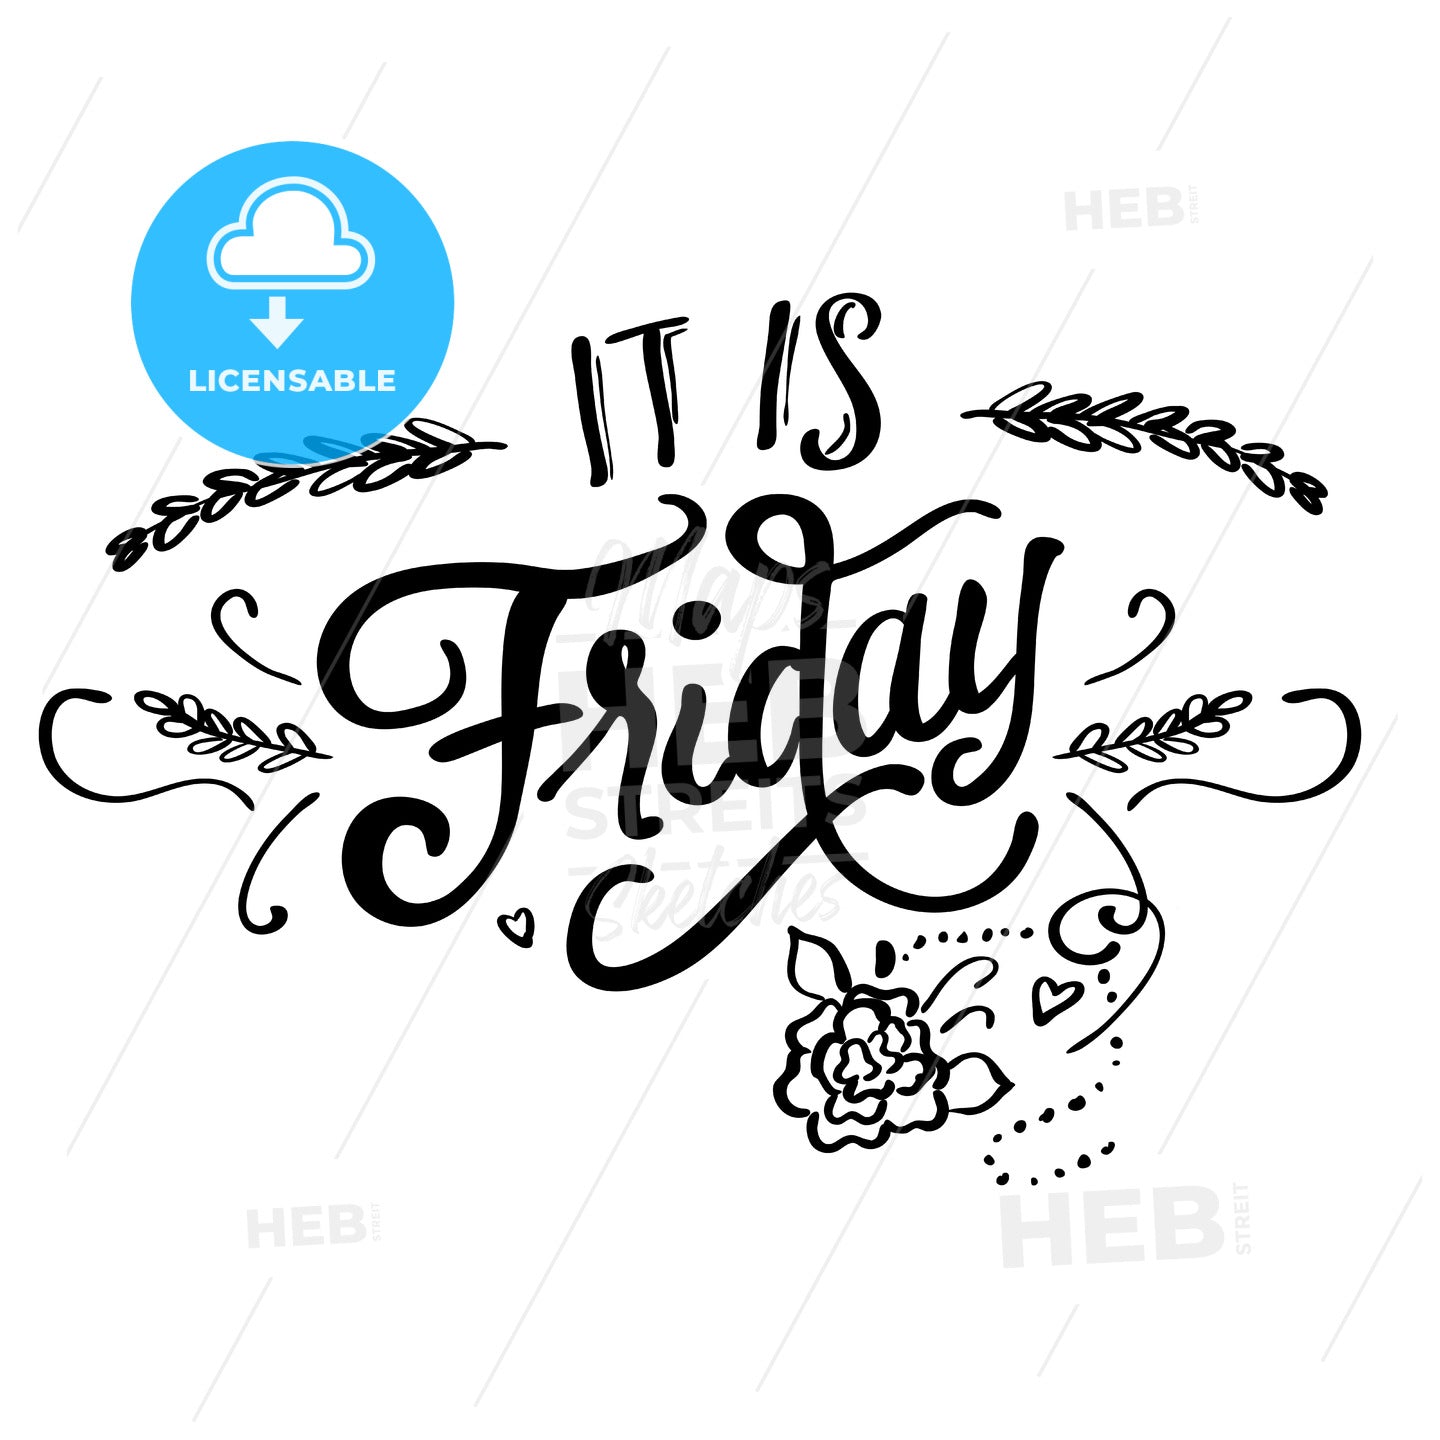 It is Friday – instant download